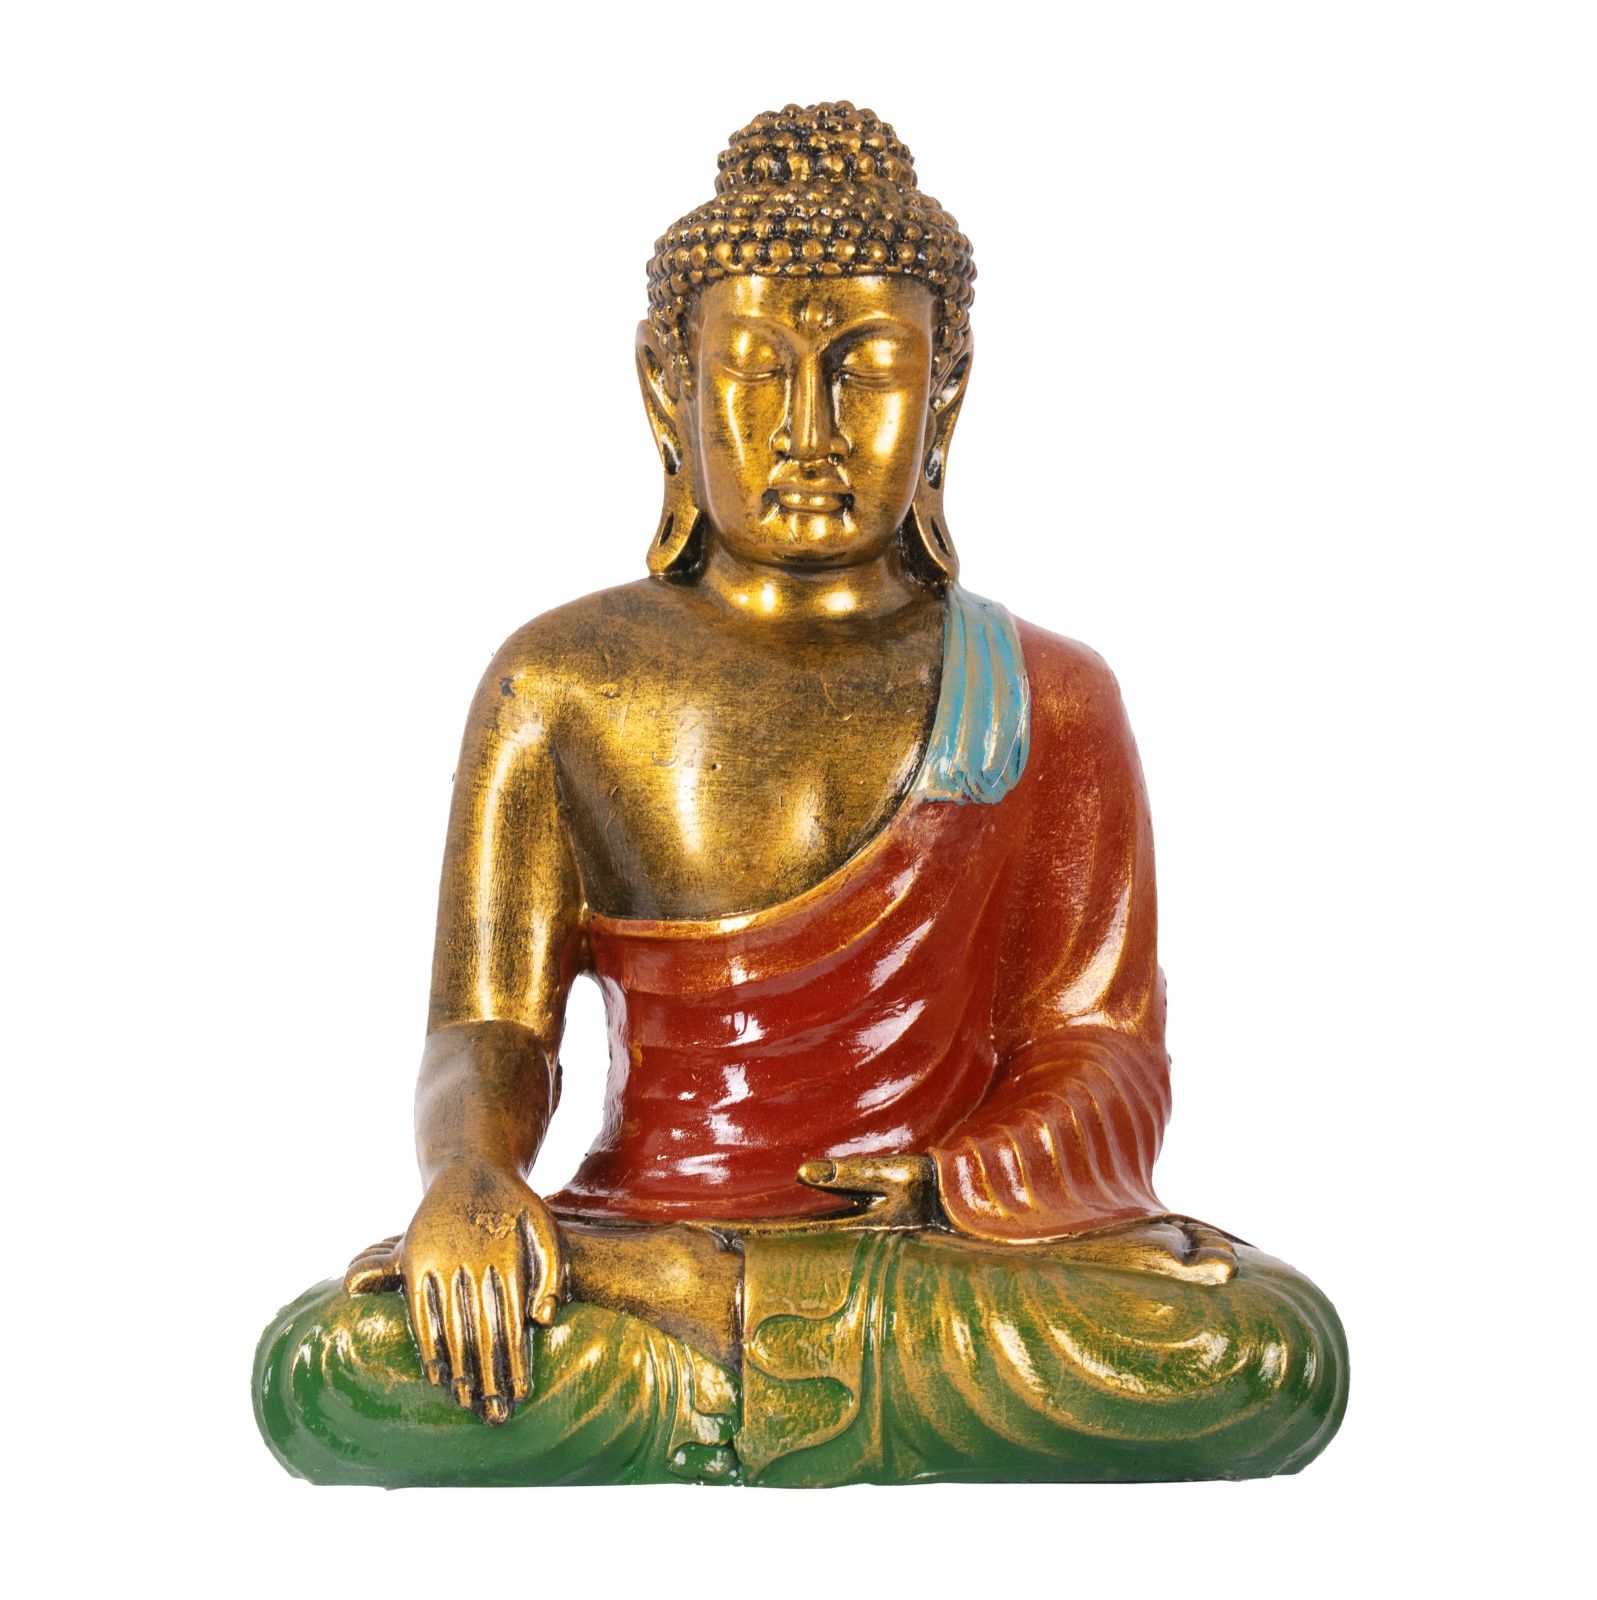 Painted resin statuette Colourful Buddha 30 cm Indonesia